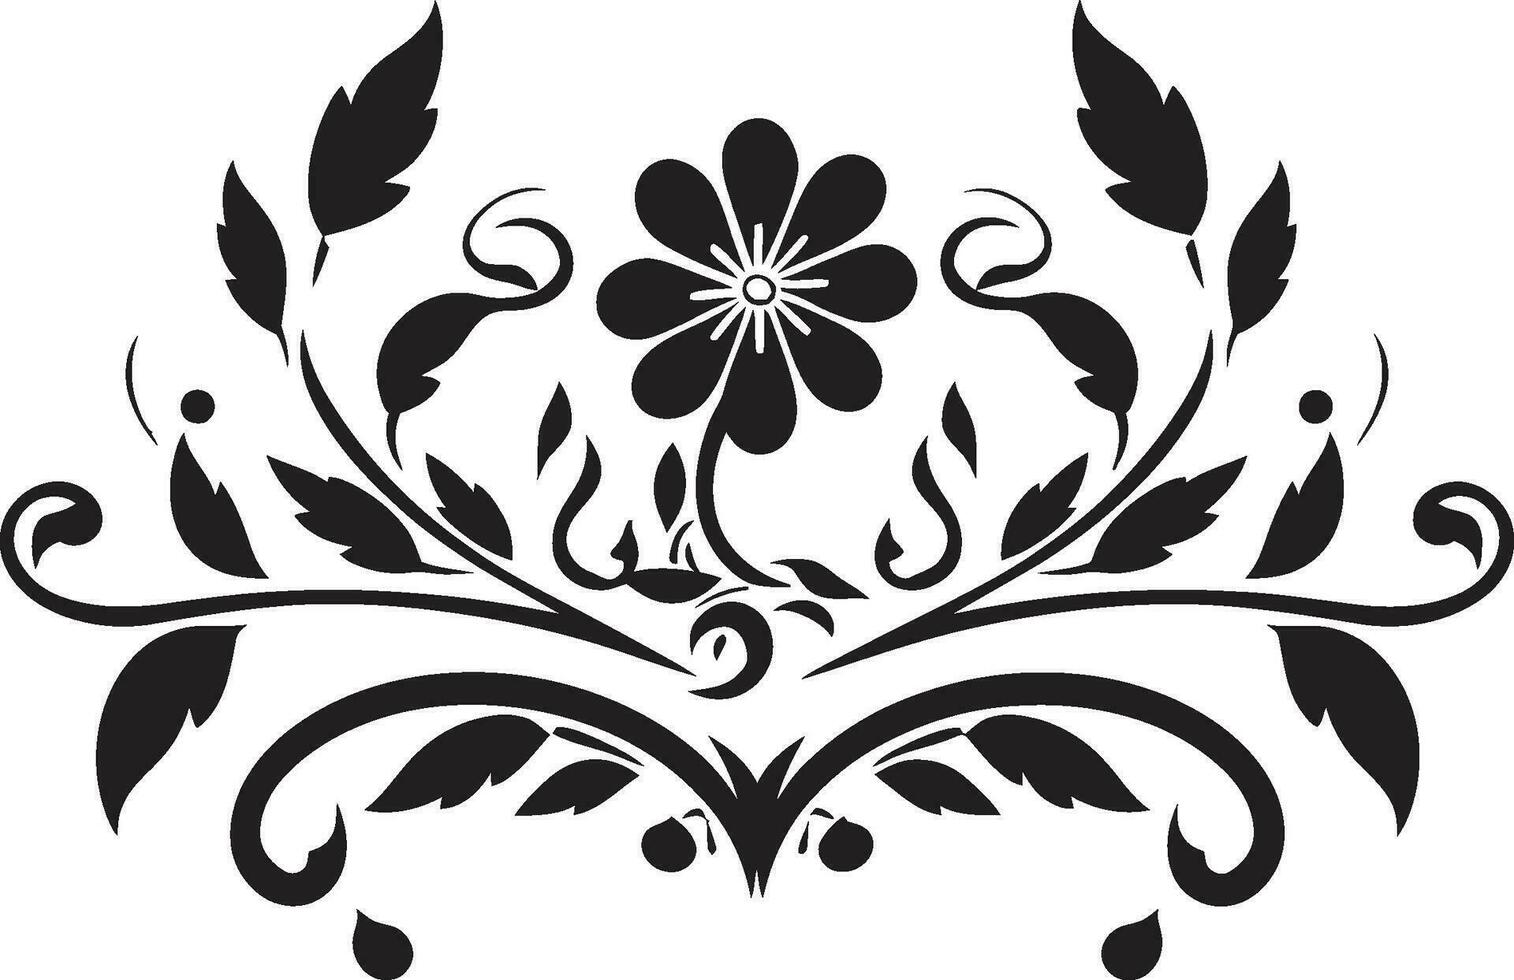 Ethereal Inked Bouquets Noir Logo Iconic Elements Monochrome Floral Serenade Noir Vector Logo Whispers